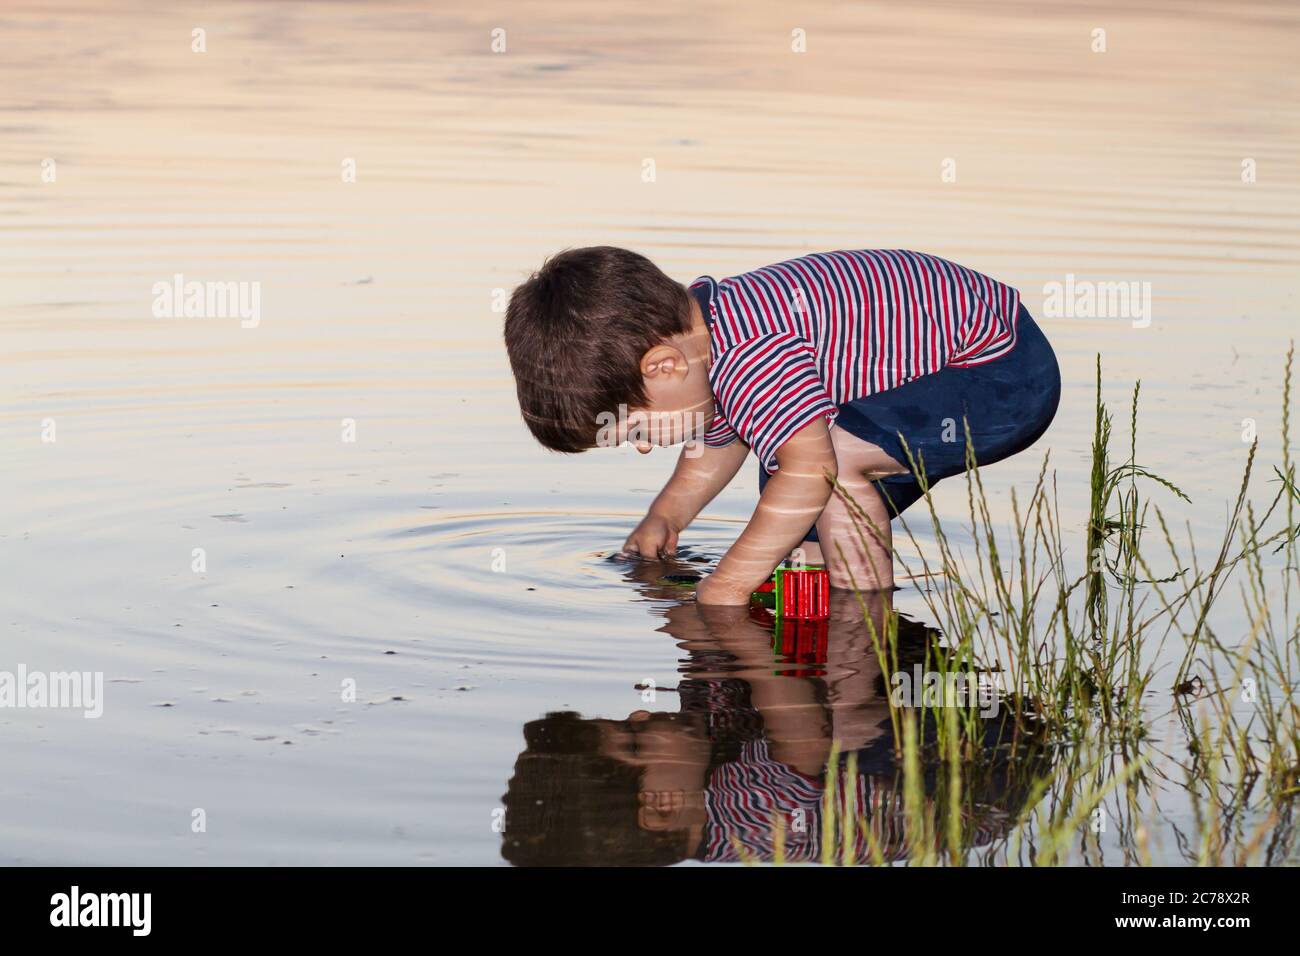 A little boy 2-3 years old plays on the river bank, the reflection of a child in the water. Outdoors in summer. Stock Photo